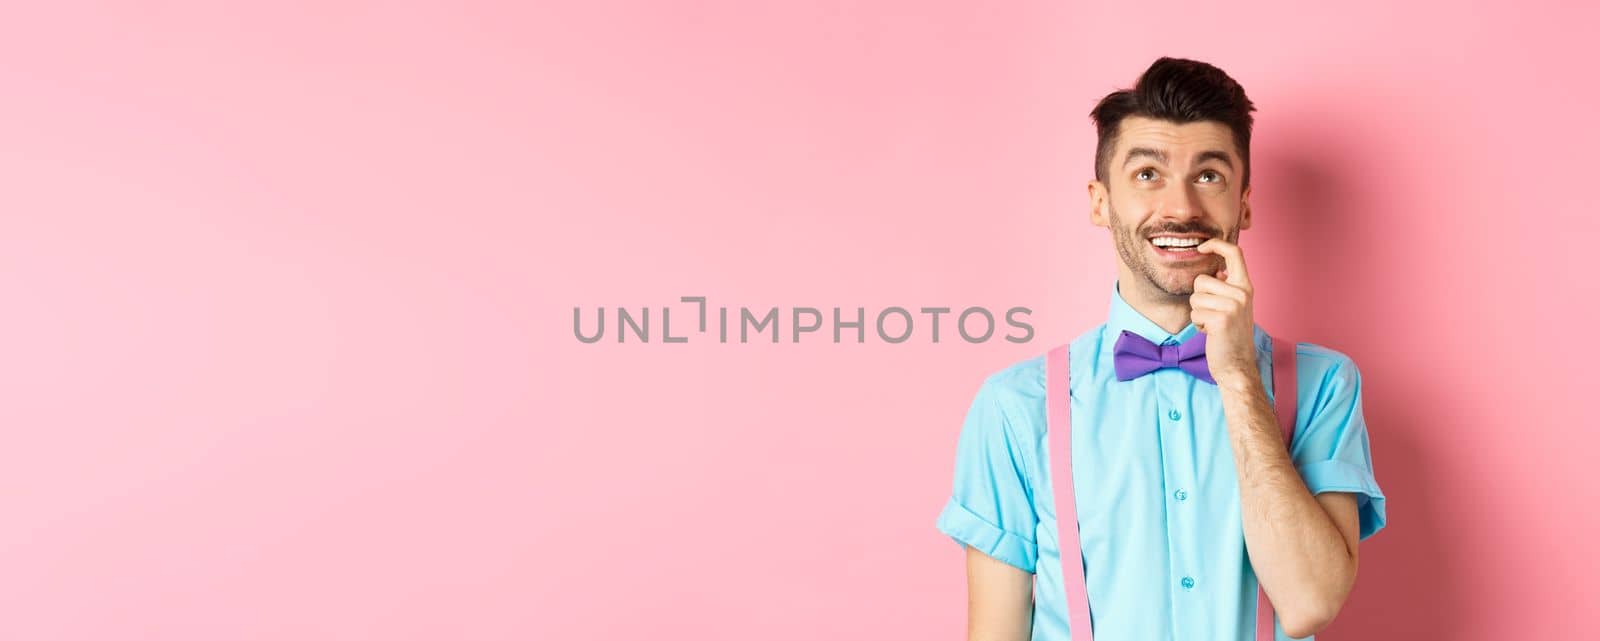 Image of smiling man making choice, looking dreamy and happy up, biting fingernail with tempted expression, wanting something, standing over pink background.